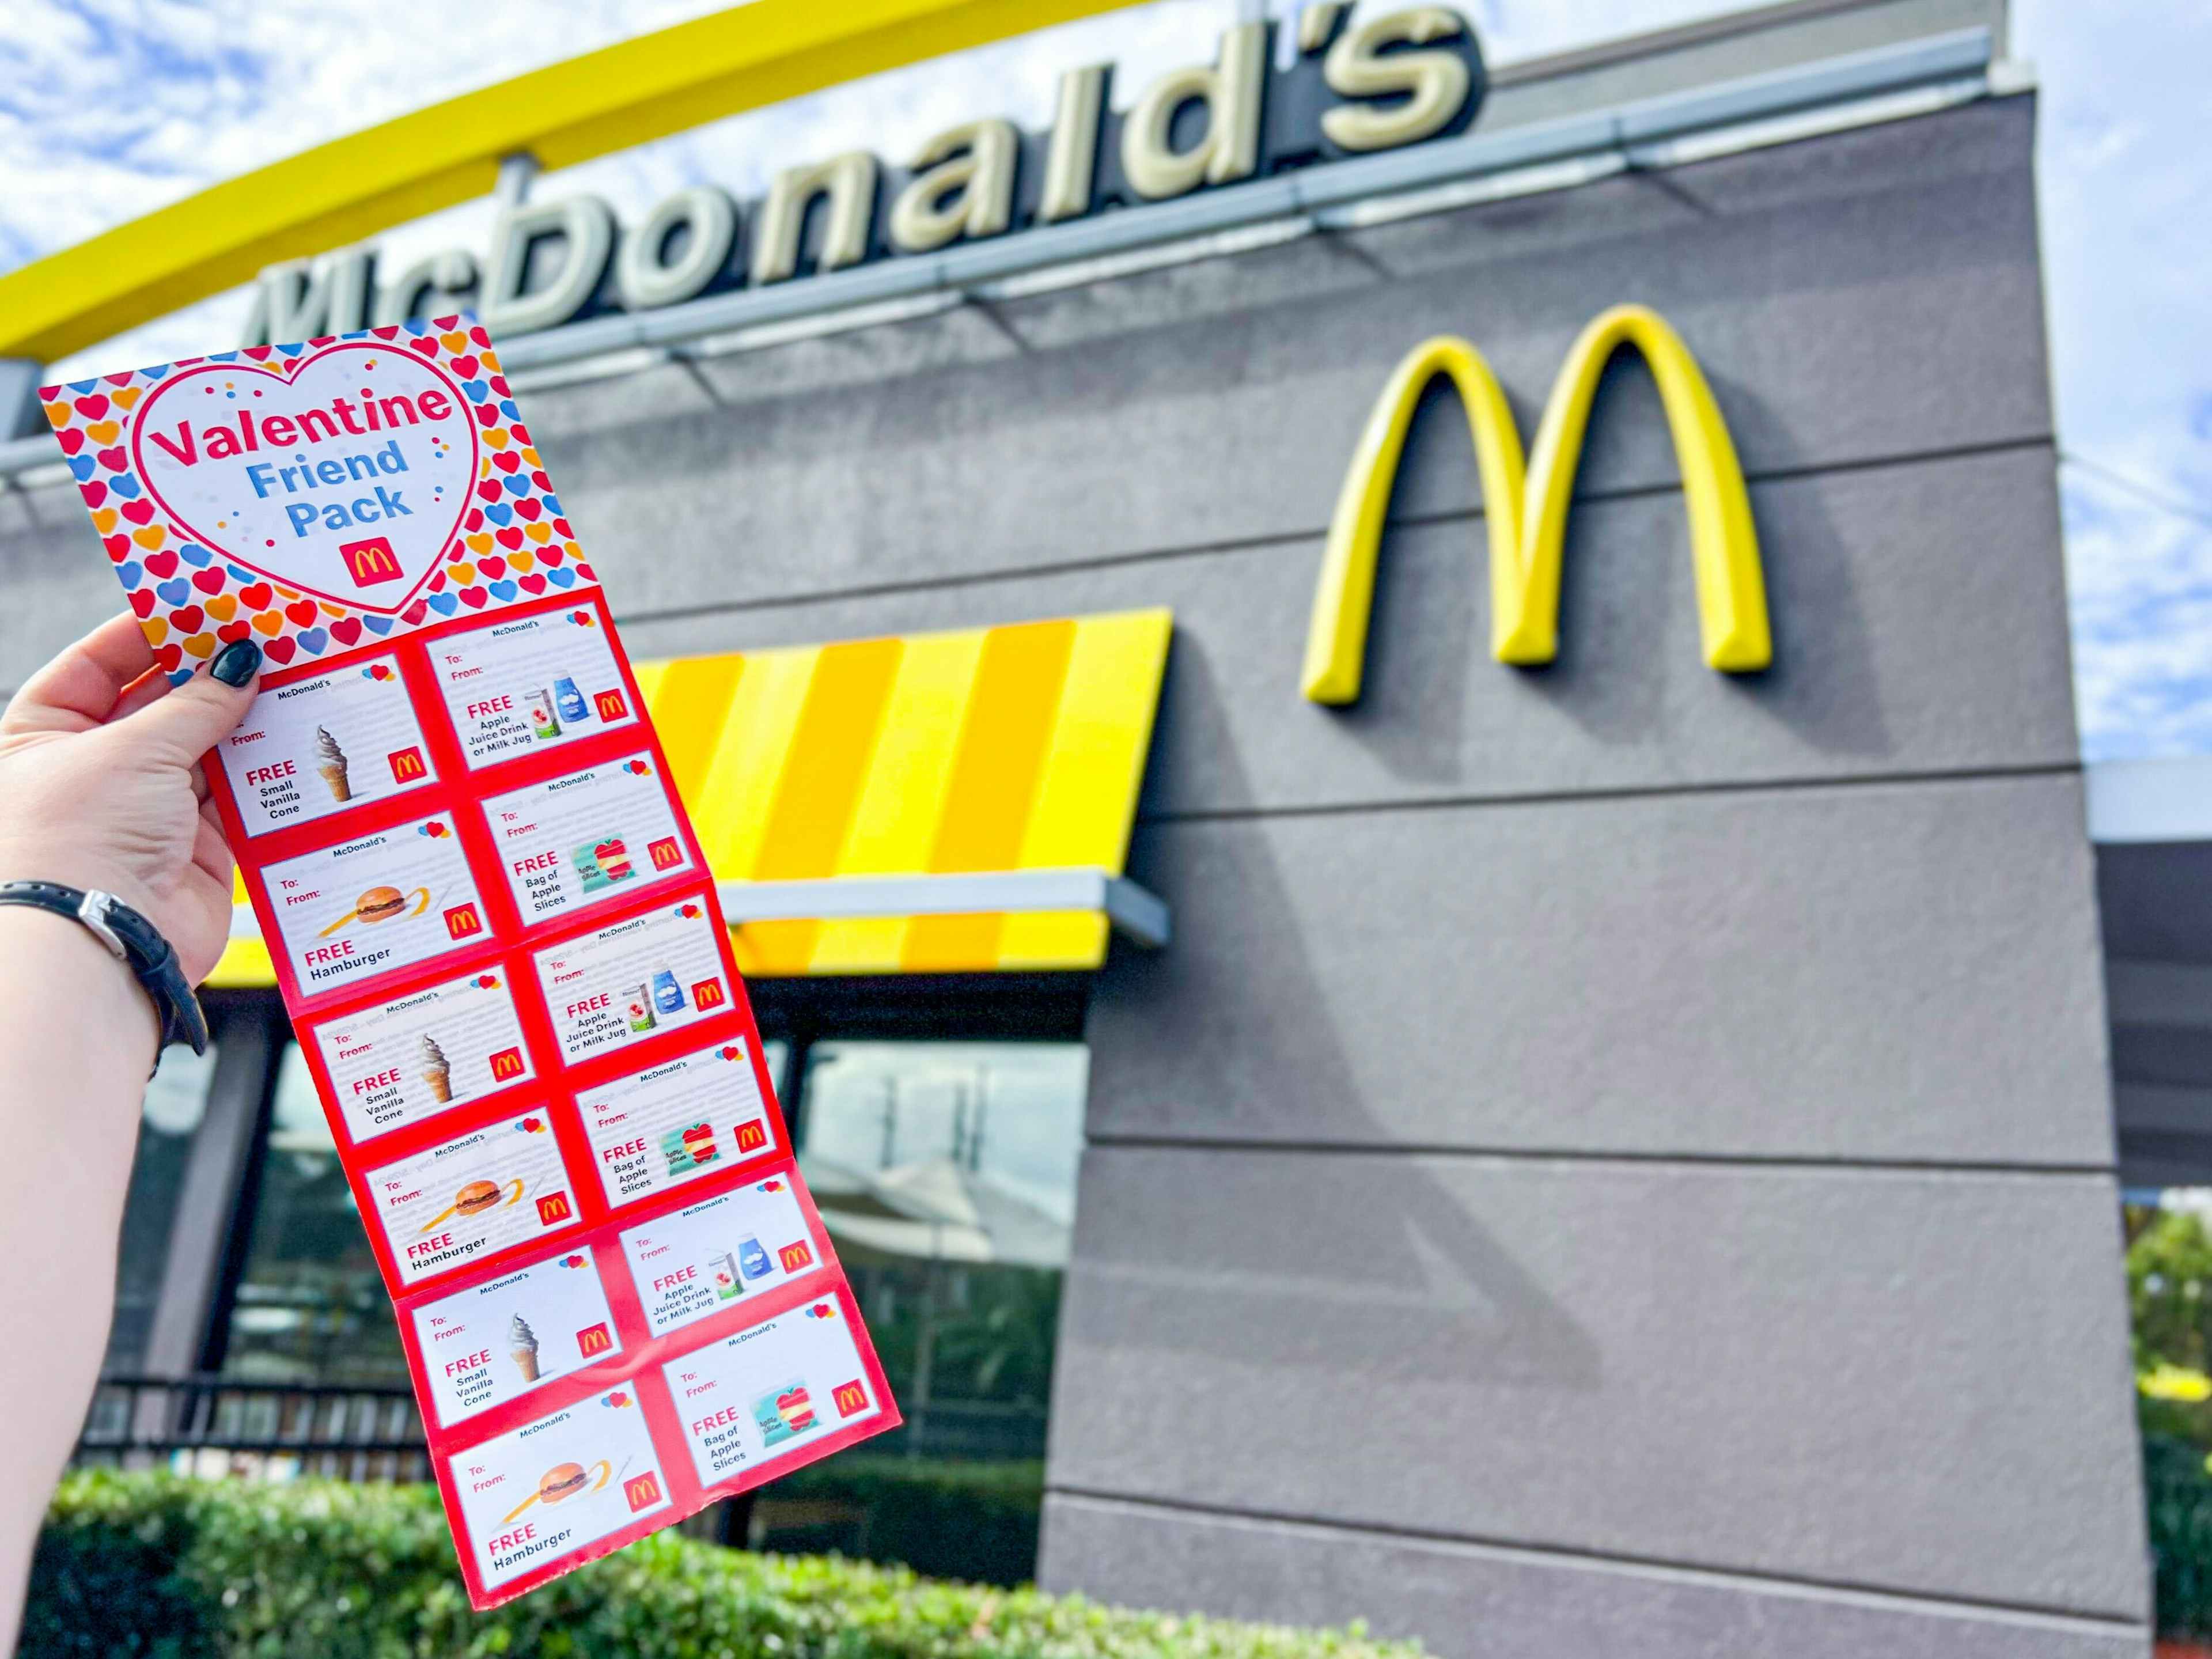 someone holding a mcdonalds valentine friend pack, showing the coupons